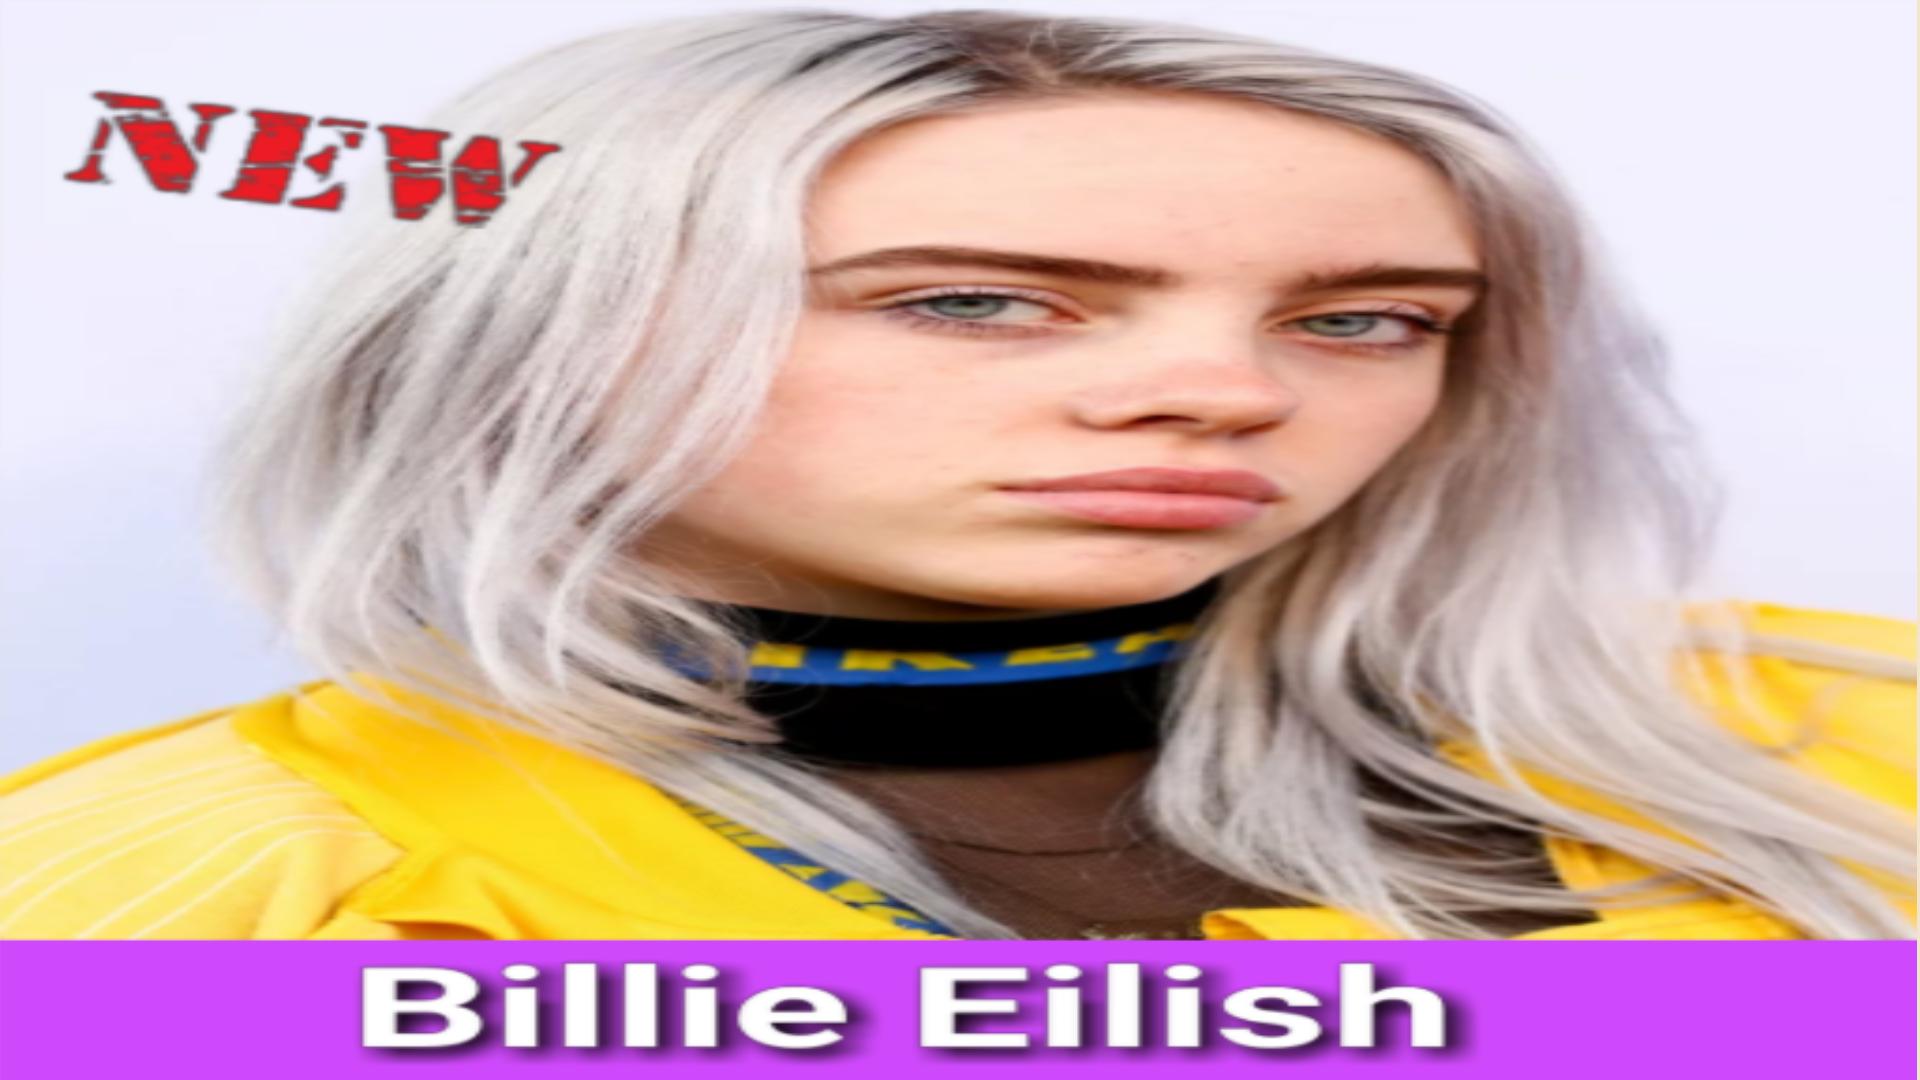 Billie Eilish's Songs mp3 without Internet for Android - APK Download